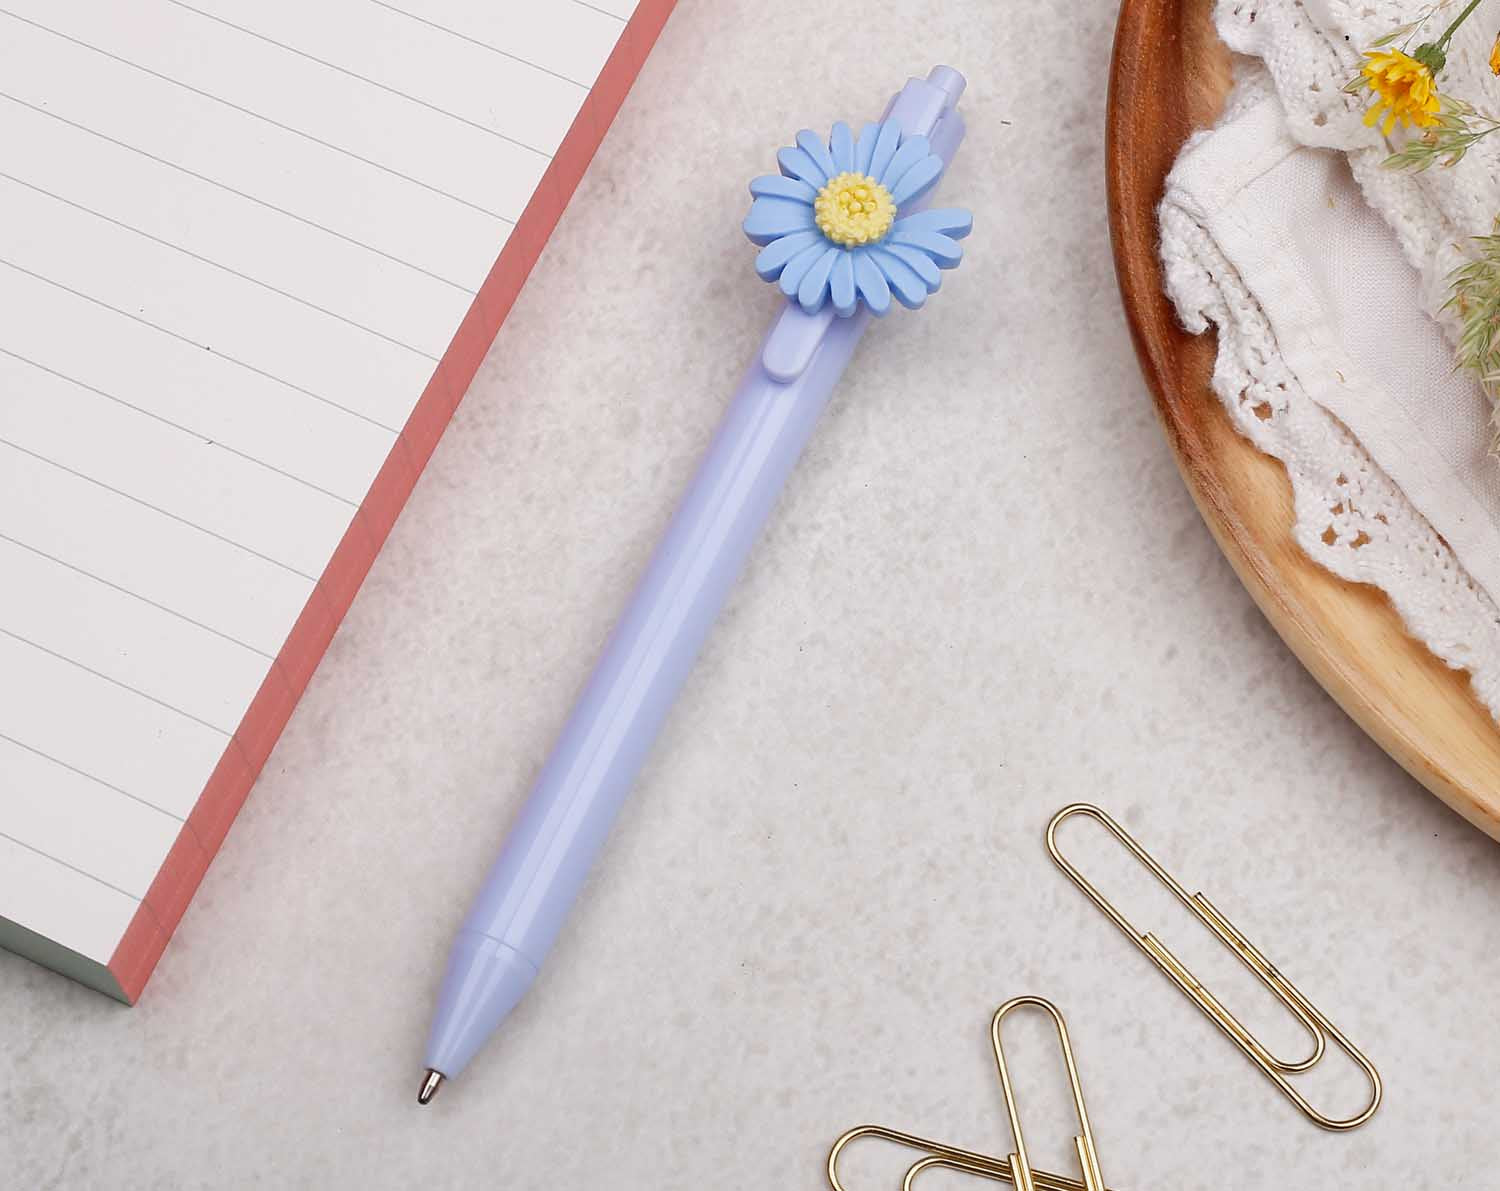 pastel blue pen with ballpoint tip and daisy flower detail